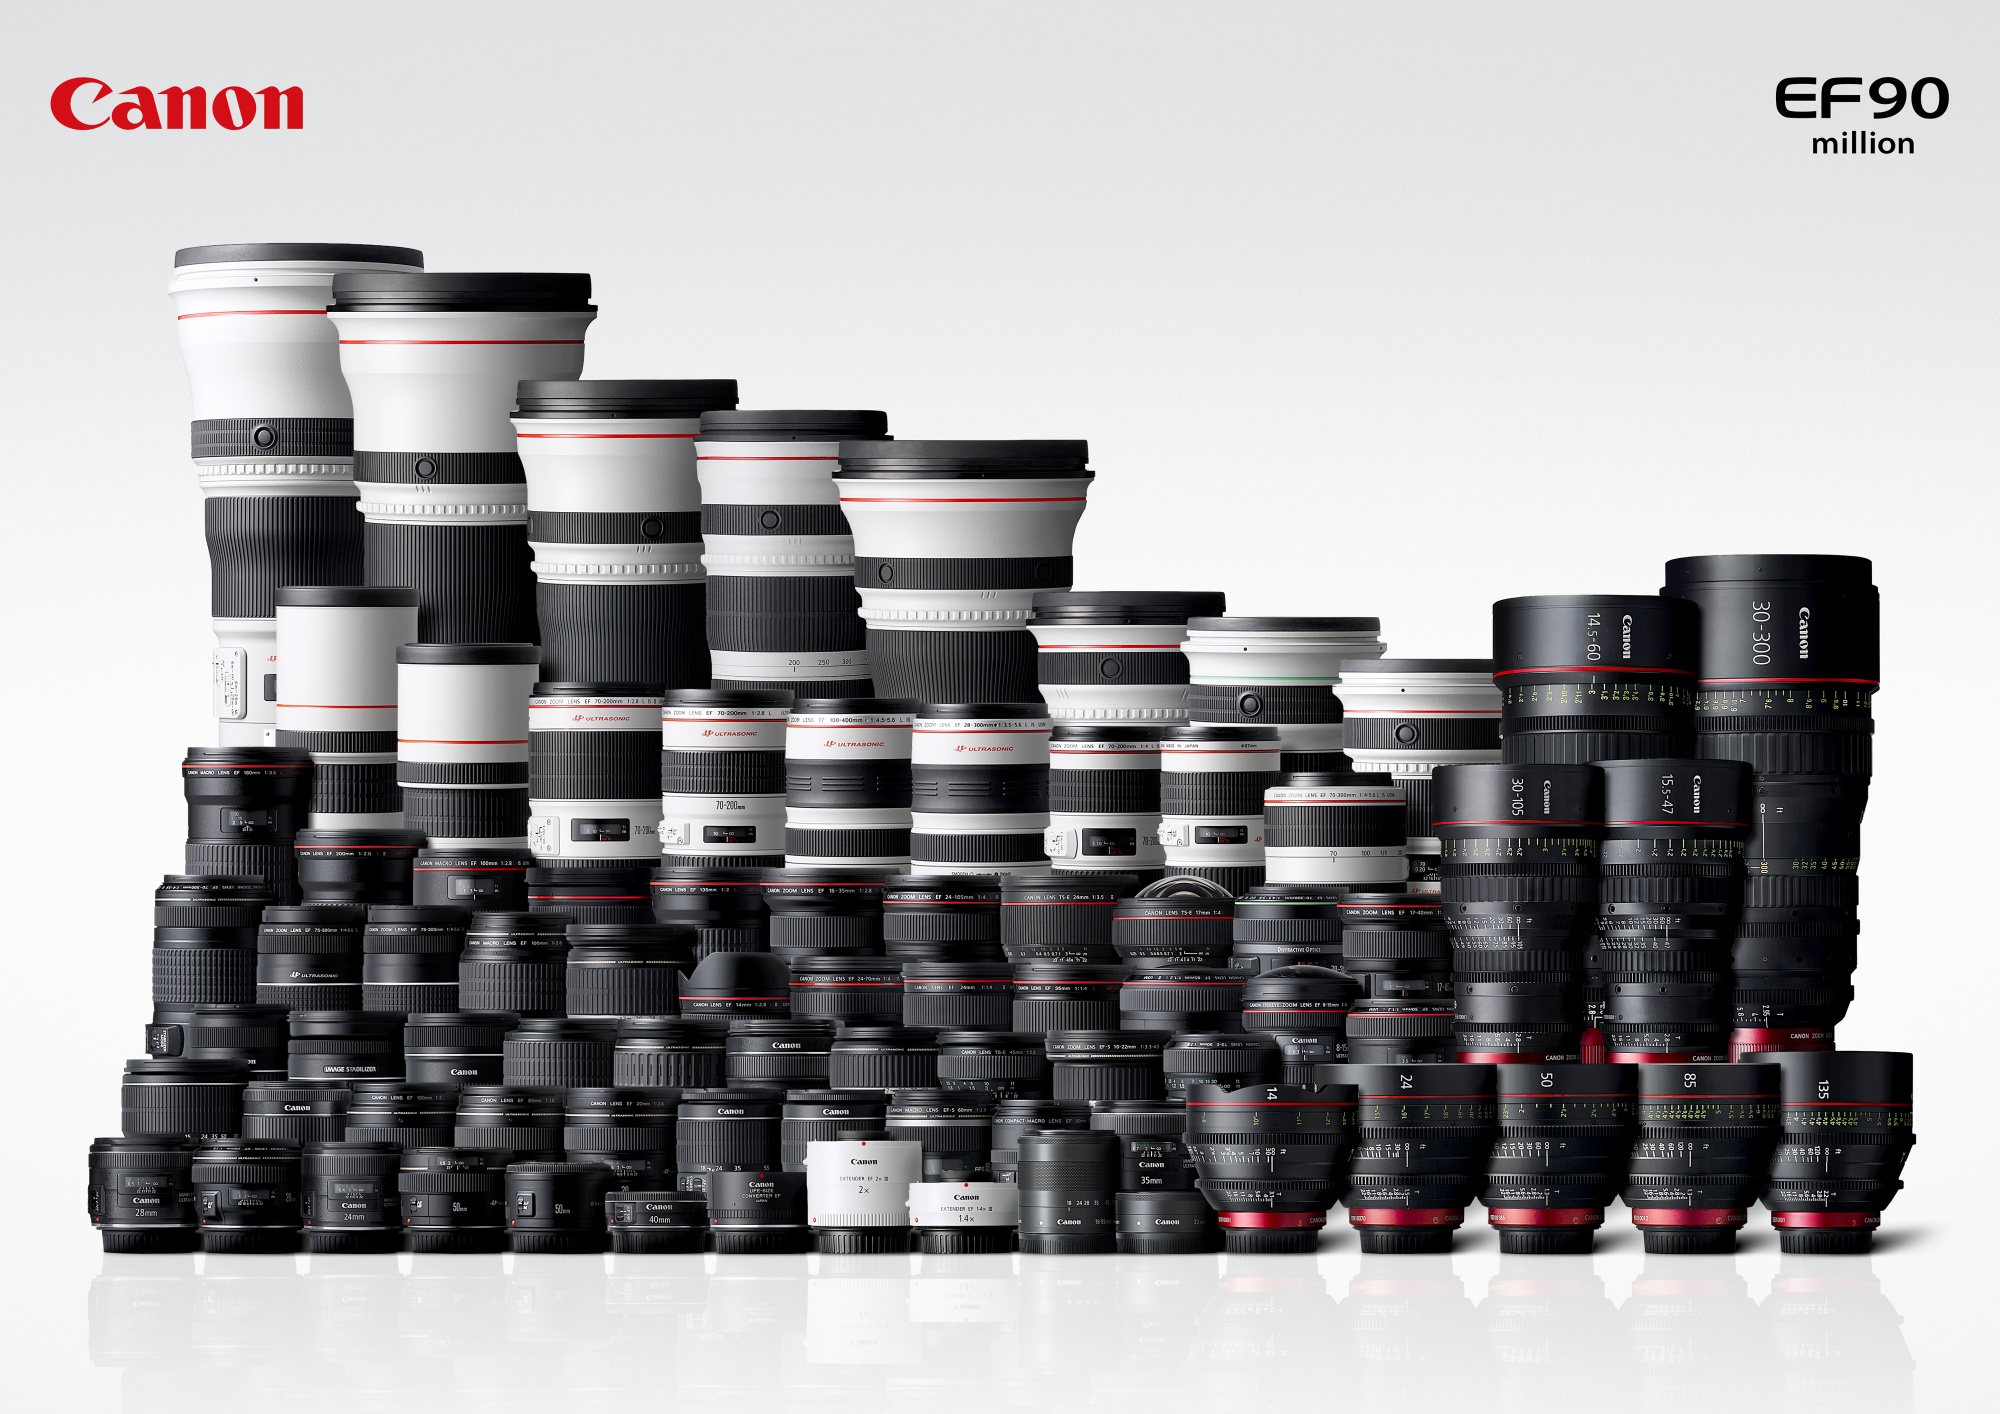 Canon Celebrates Manufacture of 90 Millionth EF Lens - The Phoblographer